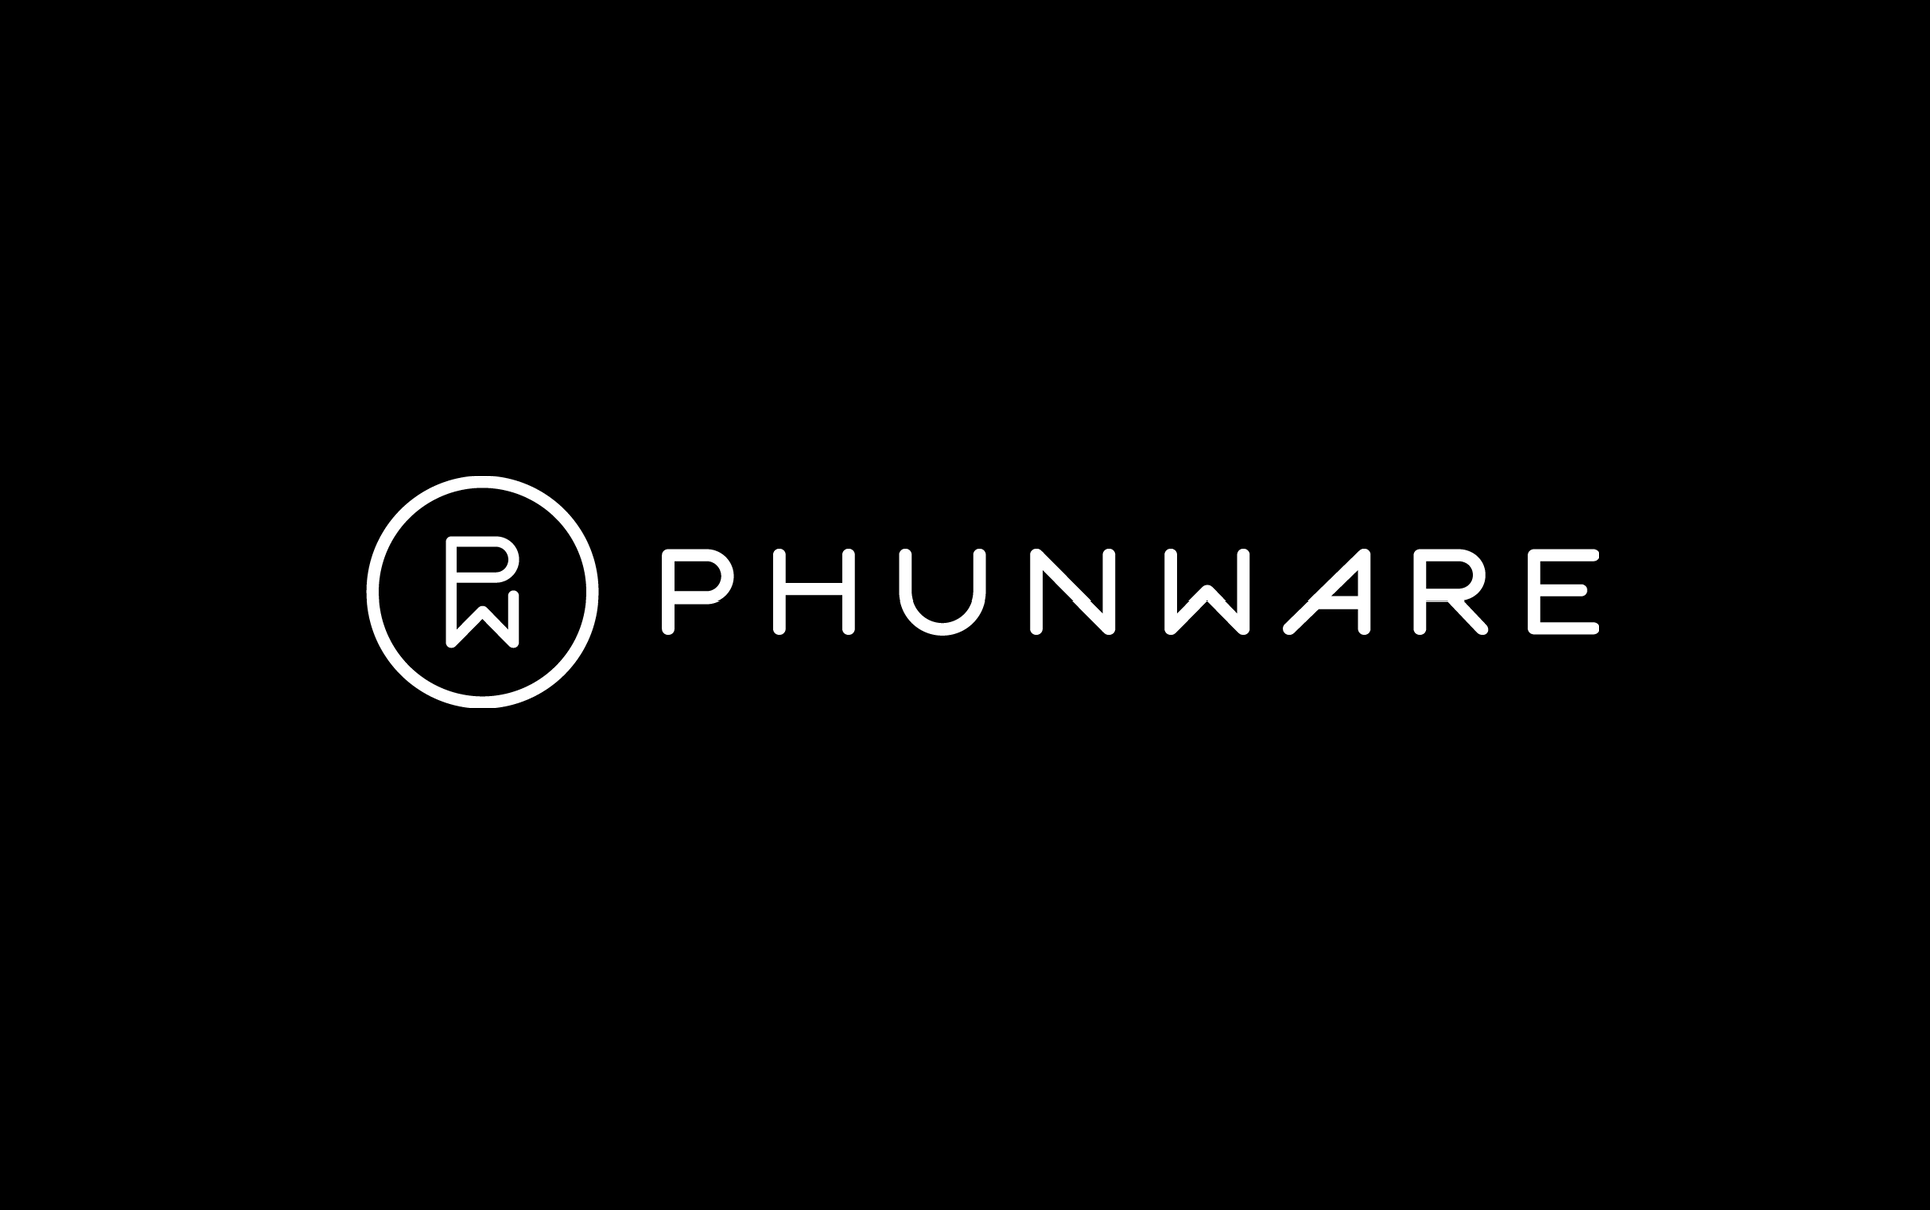 Why Phunware Shares Are Trading Higher Today